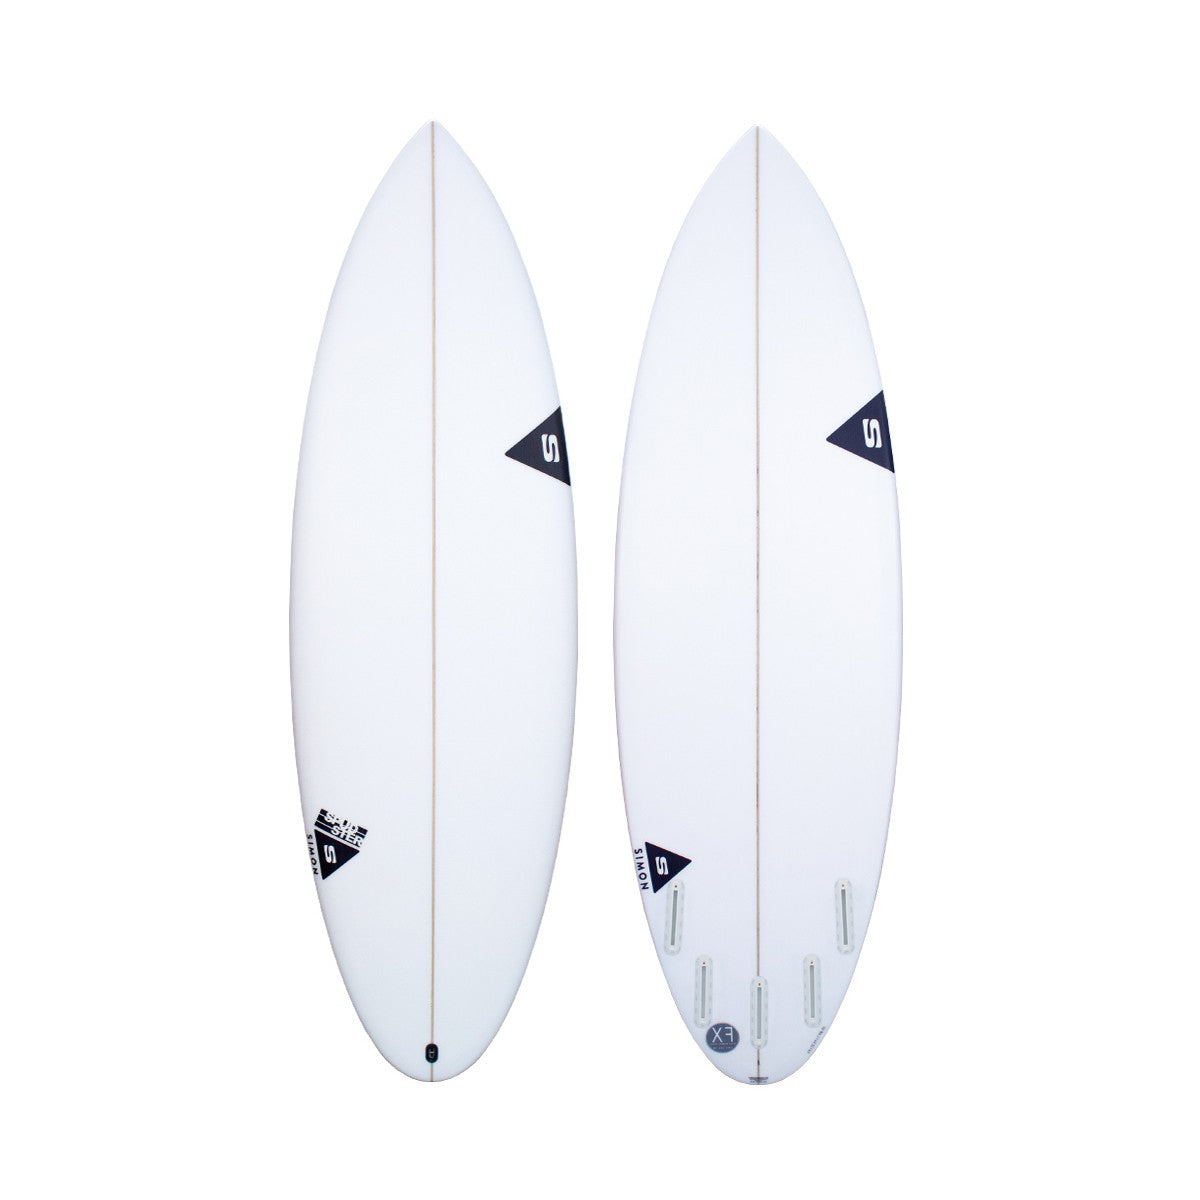 SIMON ANDERSON Surfboards - Spudster 5'10 XF (epoxy) - Futures